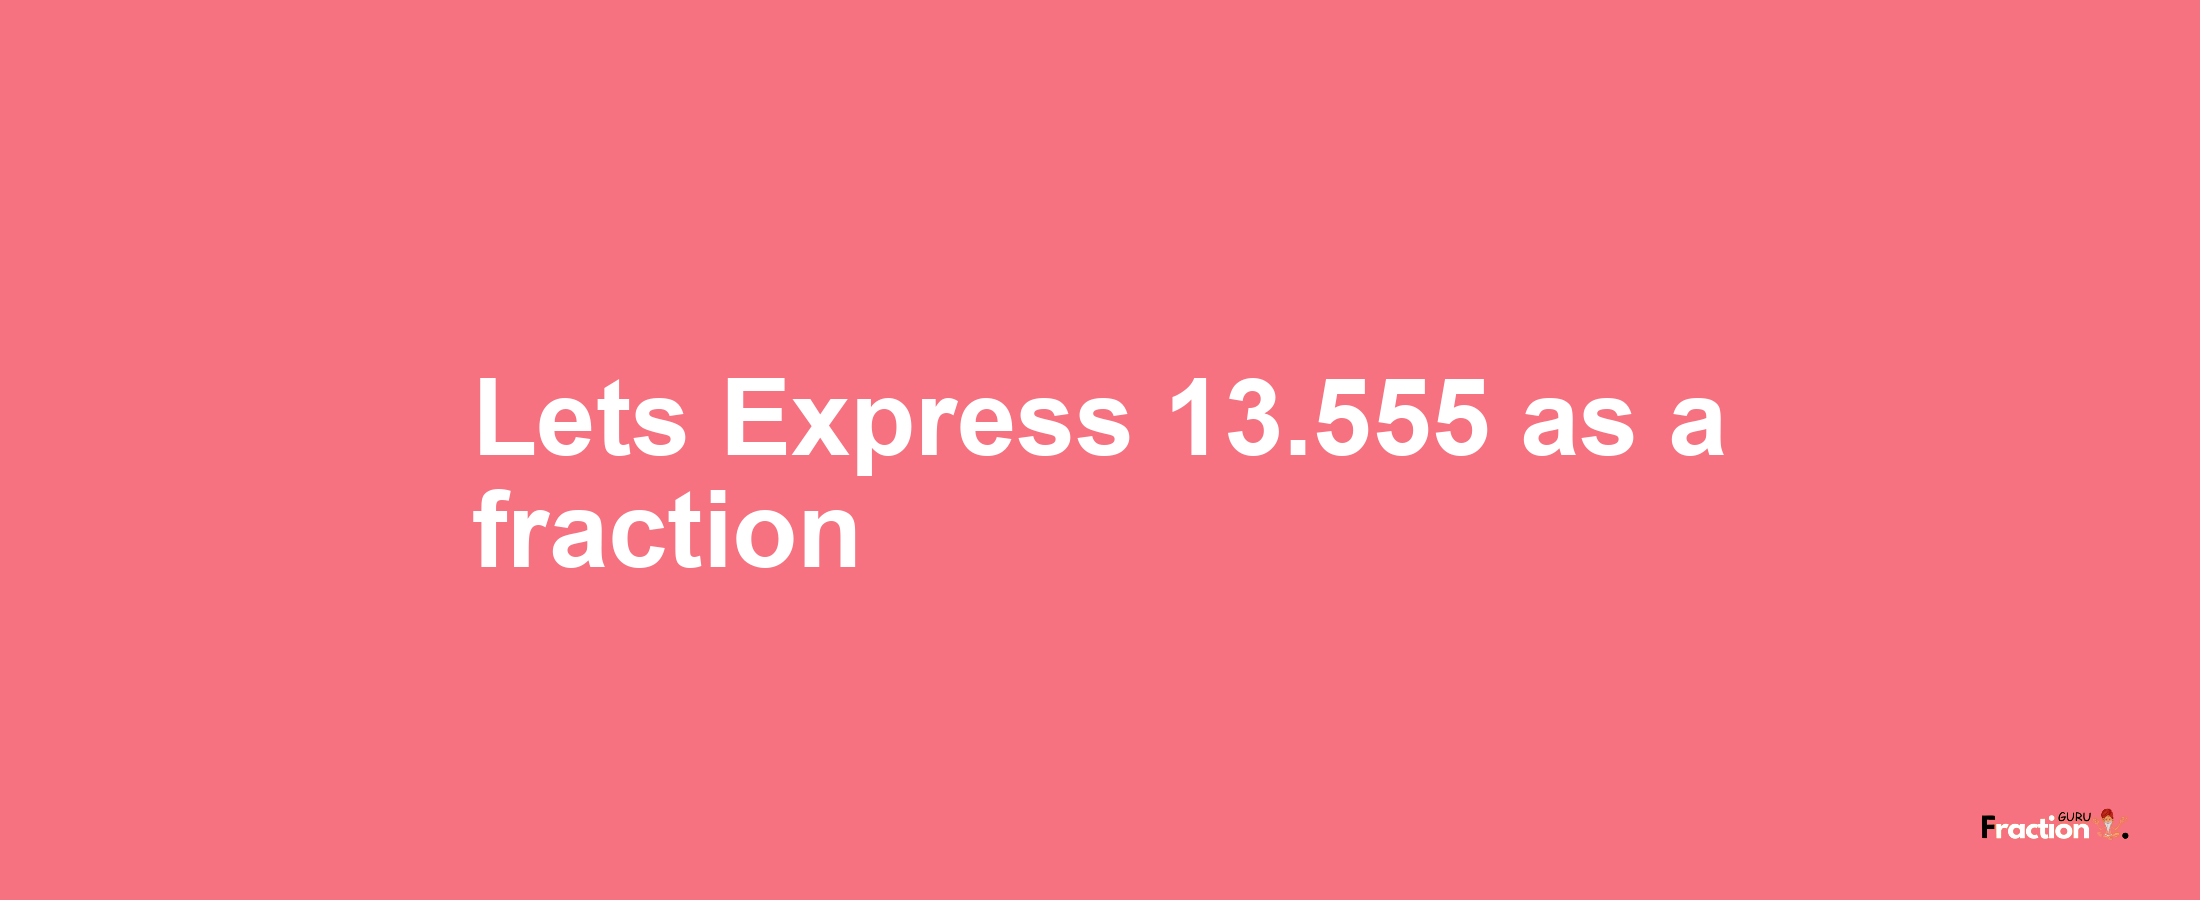 Lets Express 13.555 as afraction